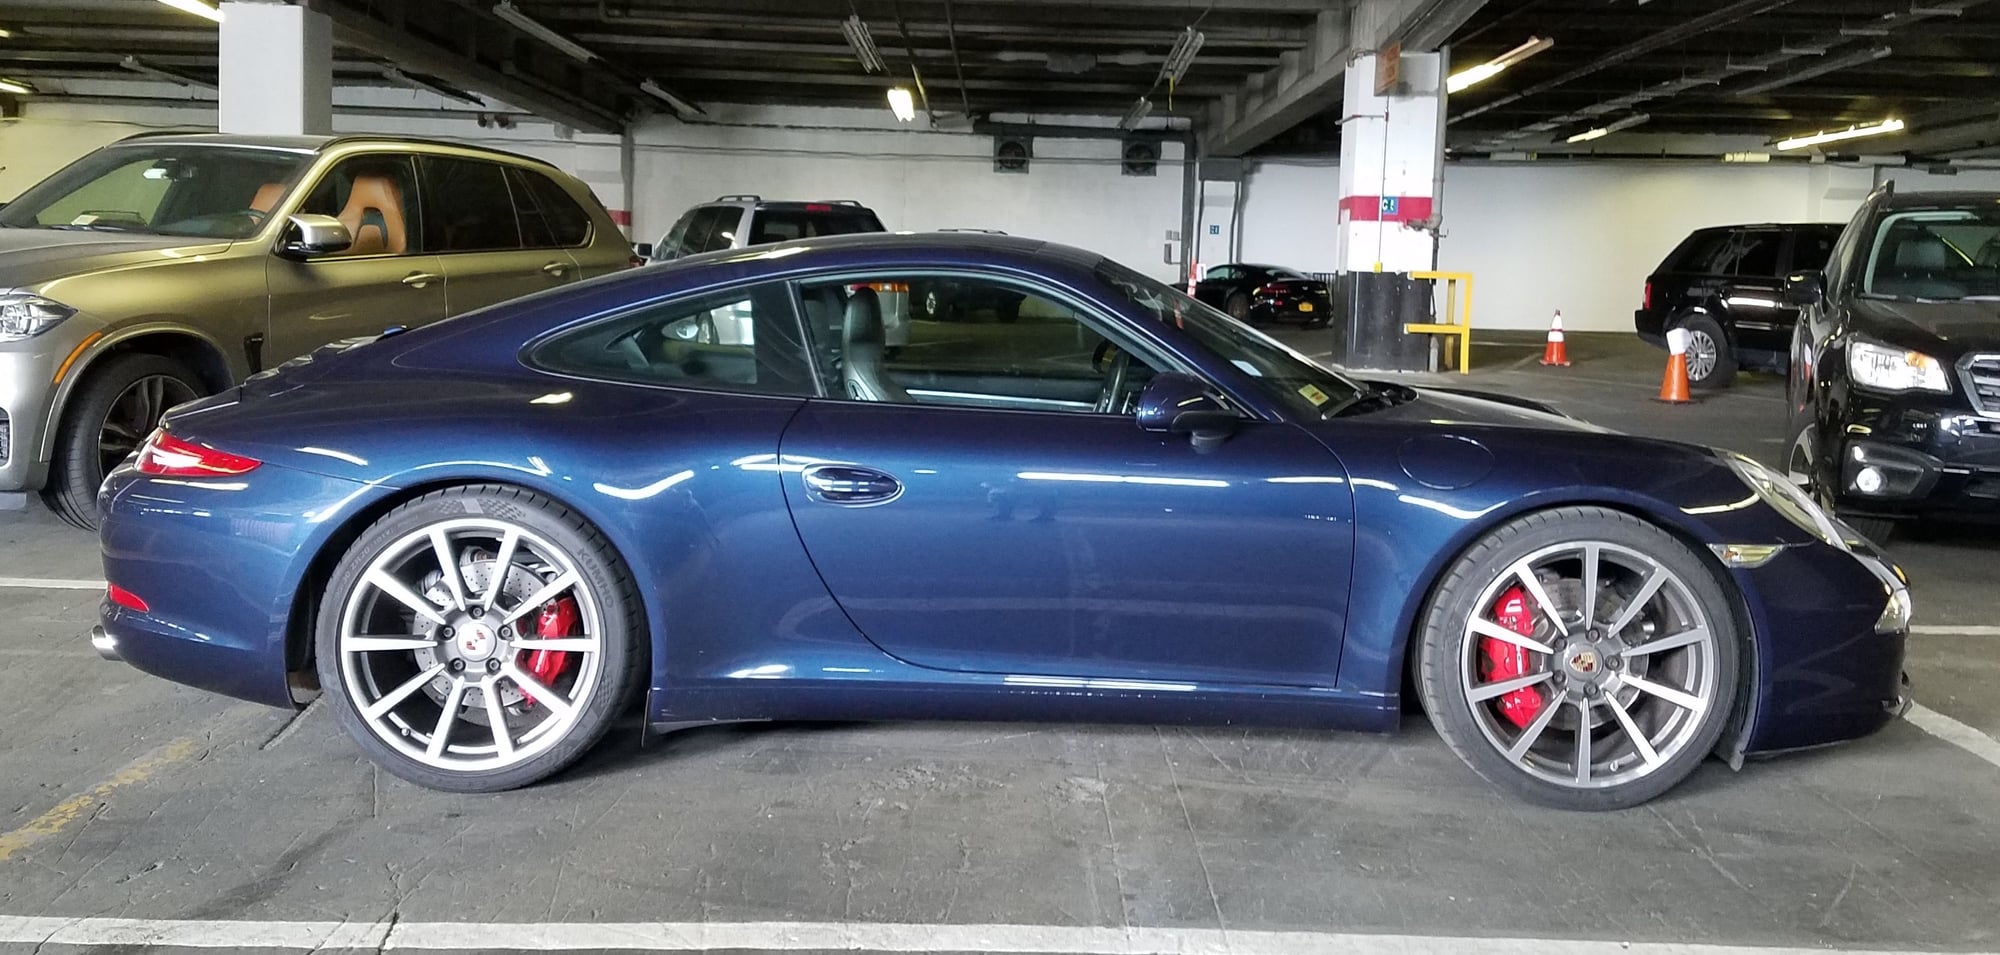 2012 Porsche 911 - 2012 991S, $129K sticker, full leather, PSE, PDCC, SPASM, hardback sport seats, Bose - Used - VIN WP0AB2A96CS122085 - 48,800 Miles - 6 cyl - 2WD - Automatic - Coupe - Blue - Los Angeles, CA 90034, United States